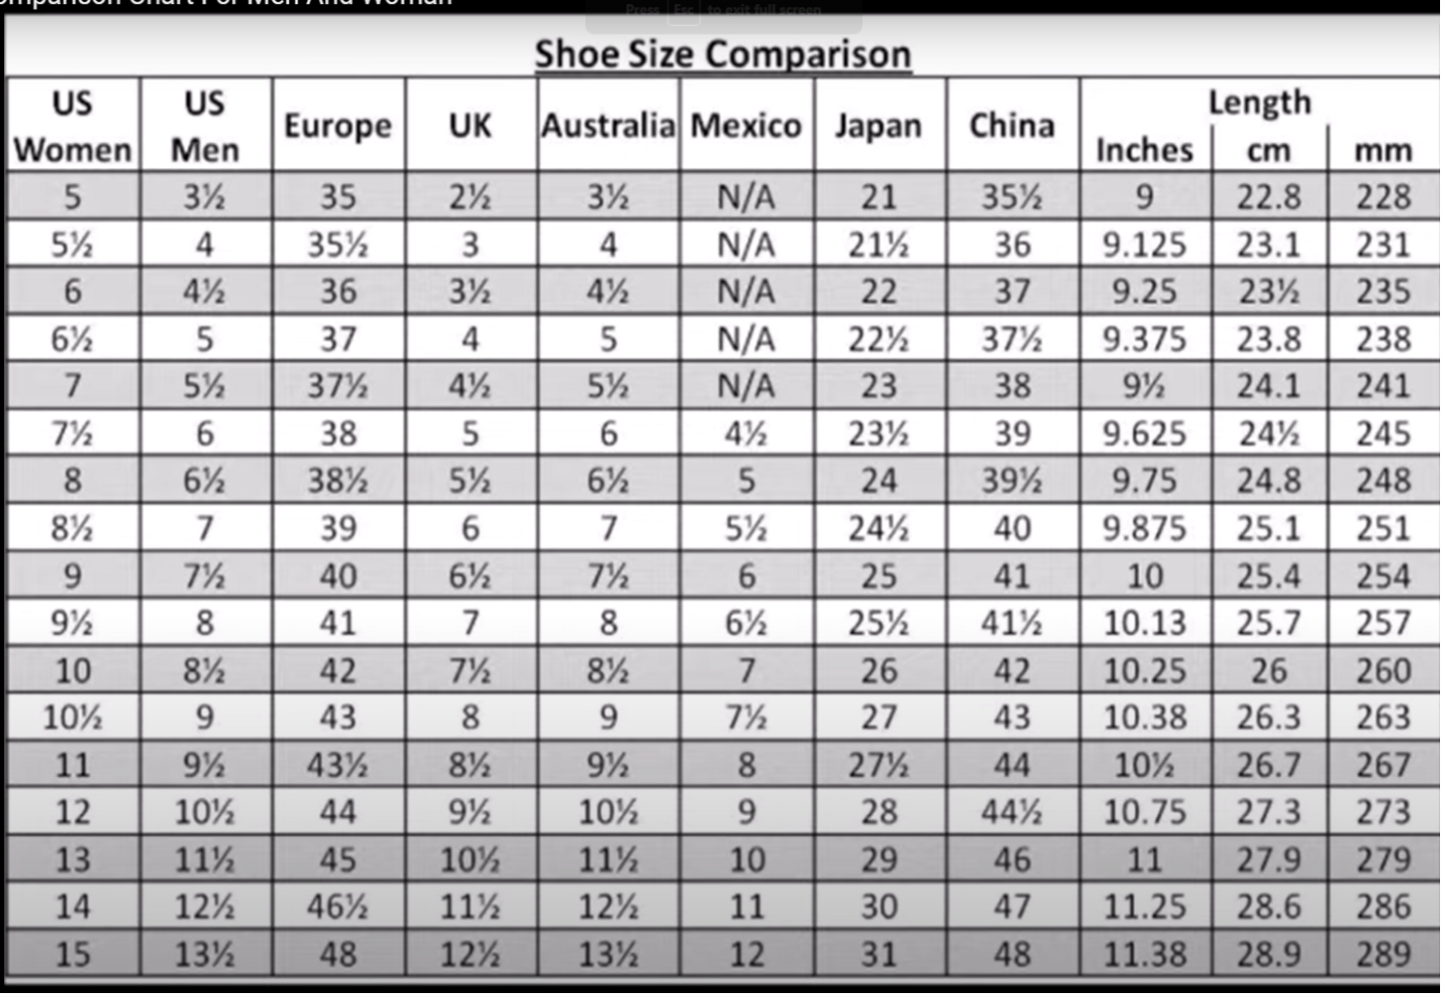 Beach swimwear - Summer Barefoot Shoes - PLEASE SCROLL DOWN TO SEE SIZE CONVERSION CHART